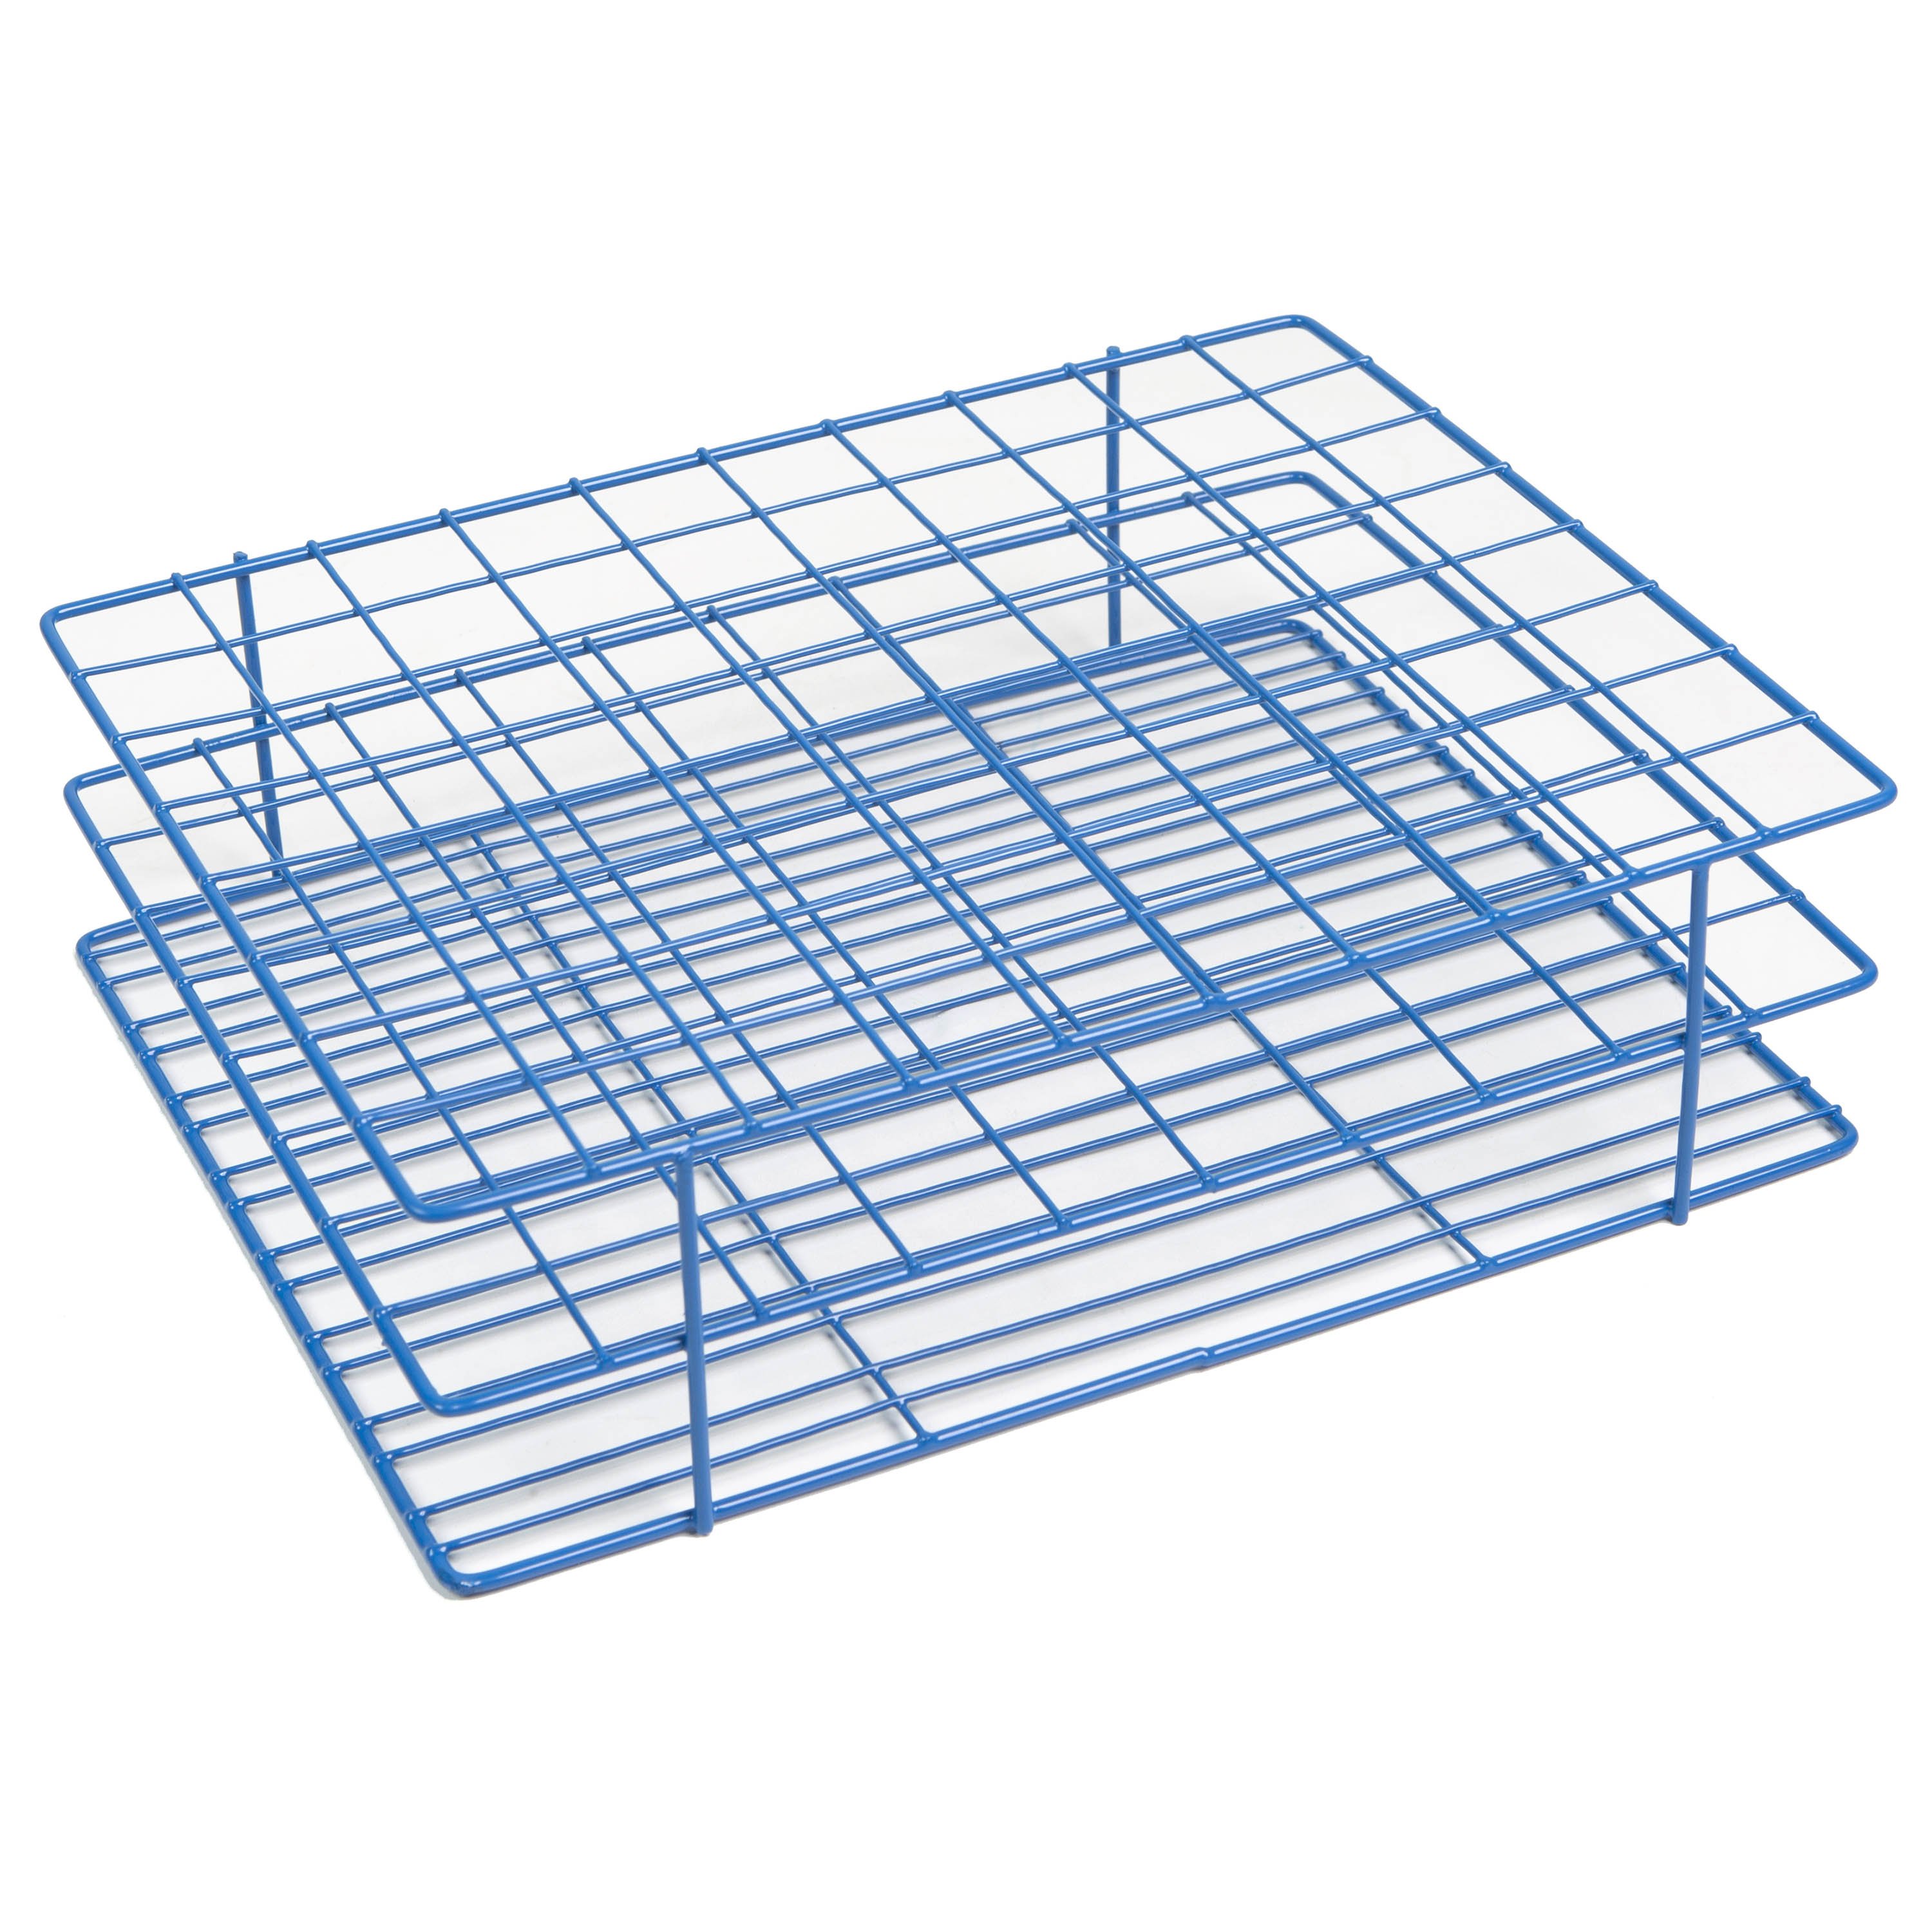 Coated Wire Rack - Fits 20-25mm Tubes, 80-Well, Blue